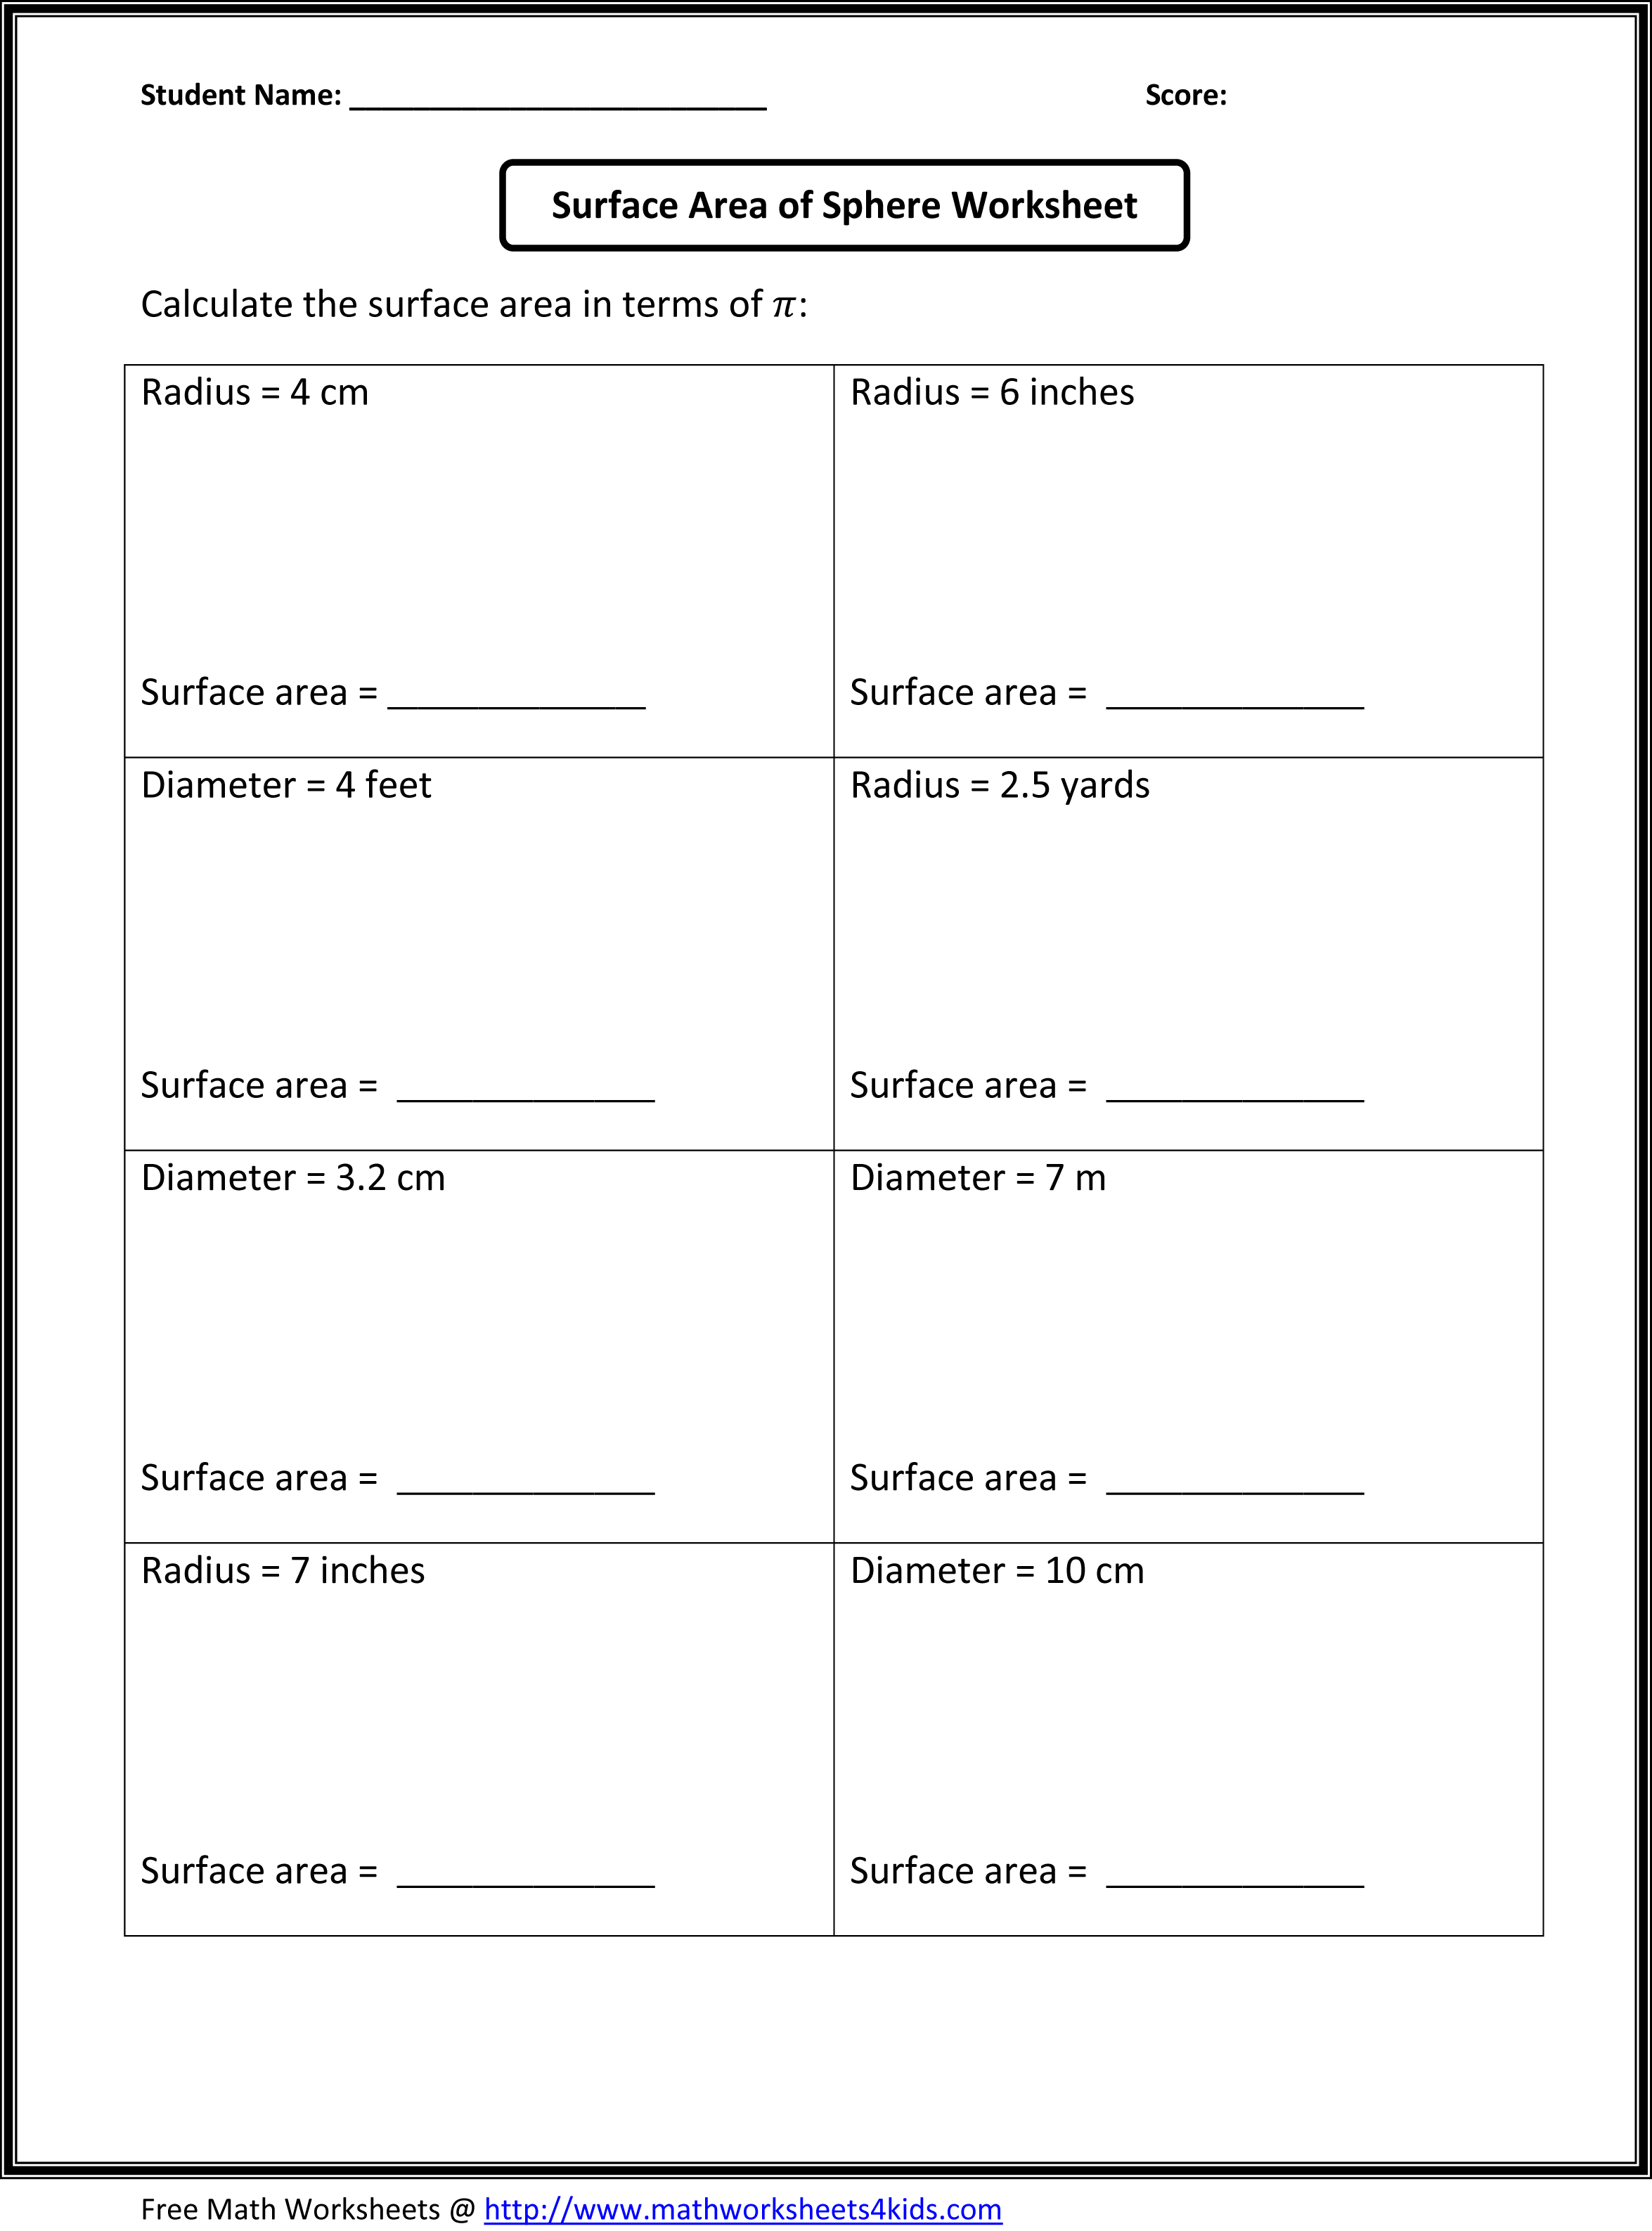 14 Best Images of Absolute Value Problems Worksheet